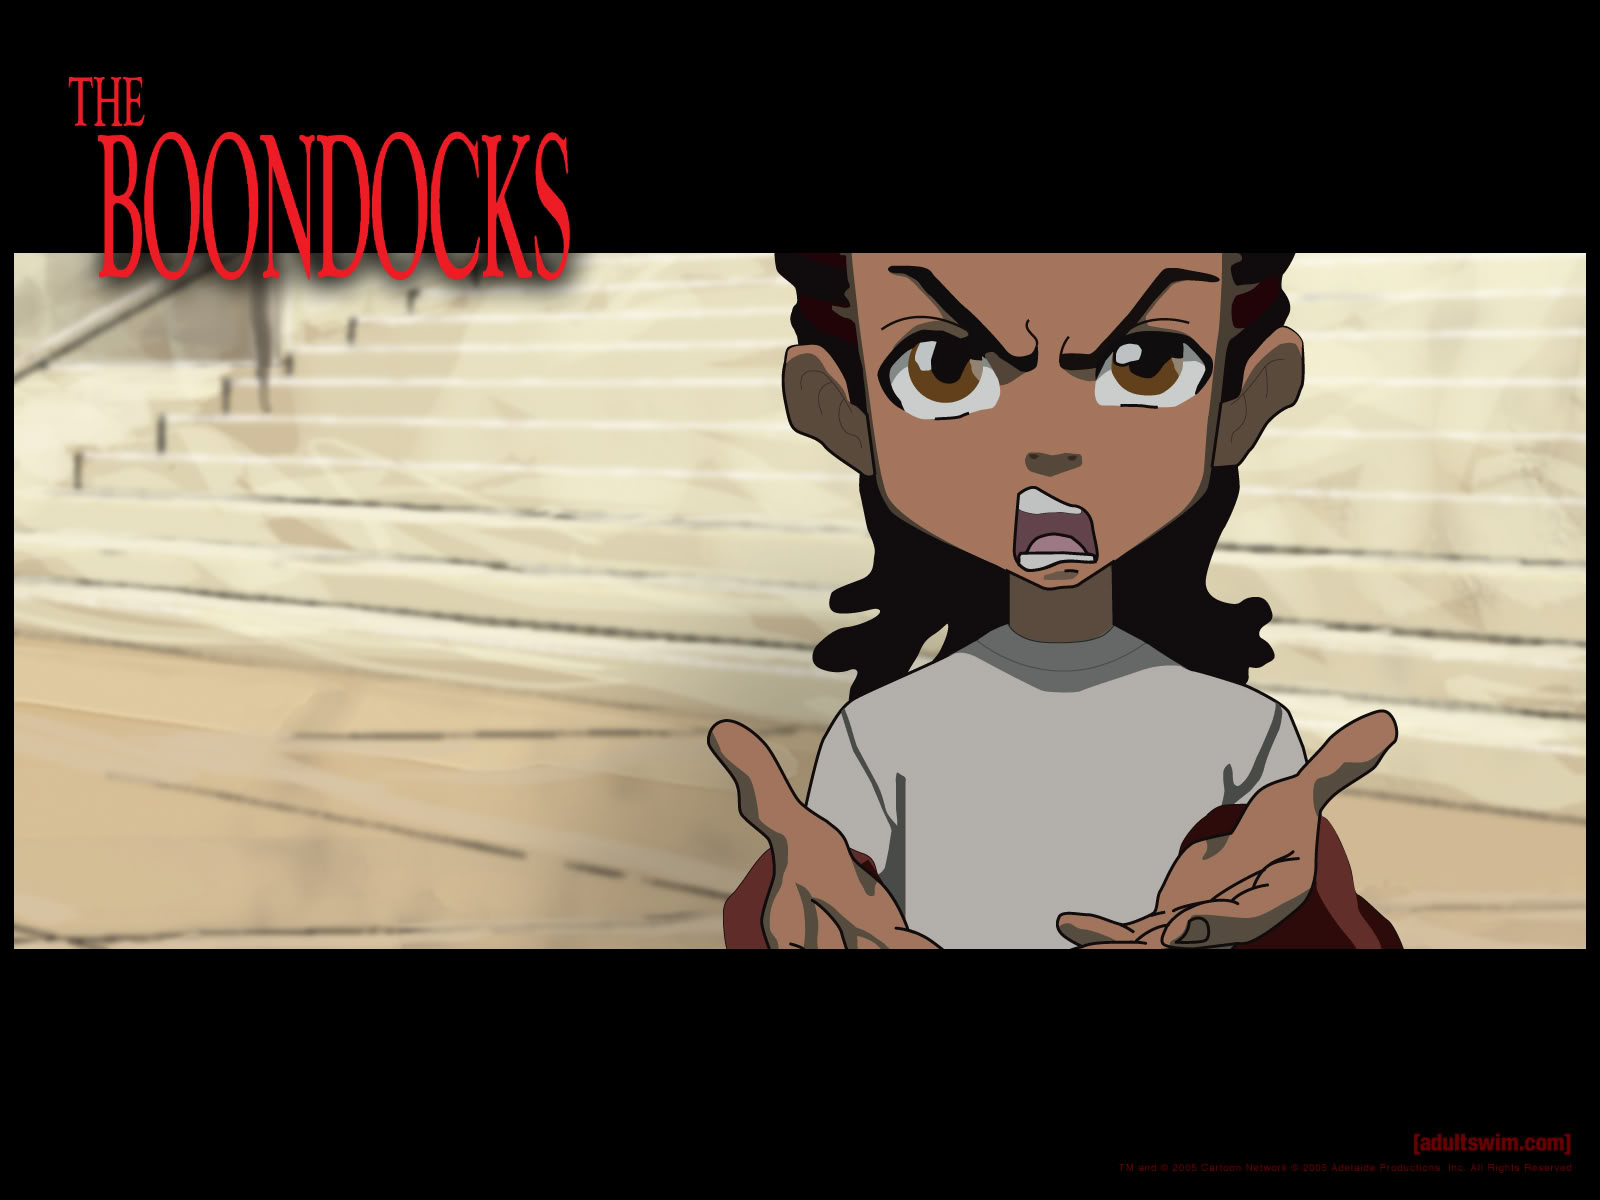 Funny Boondocks Quotes Riley.